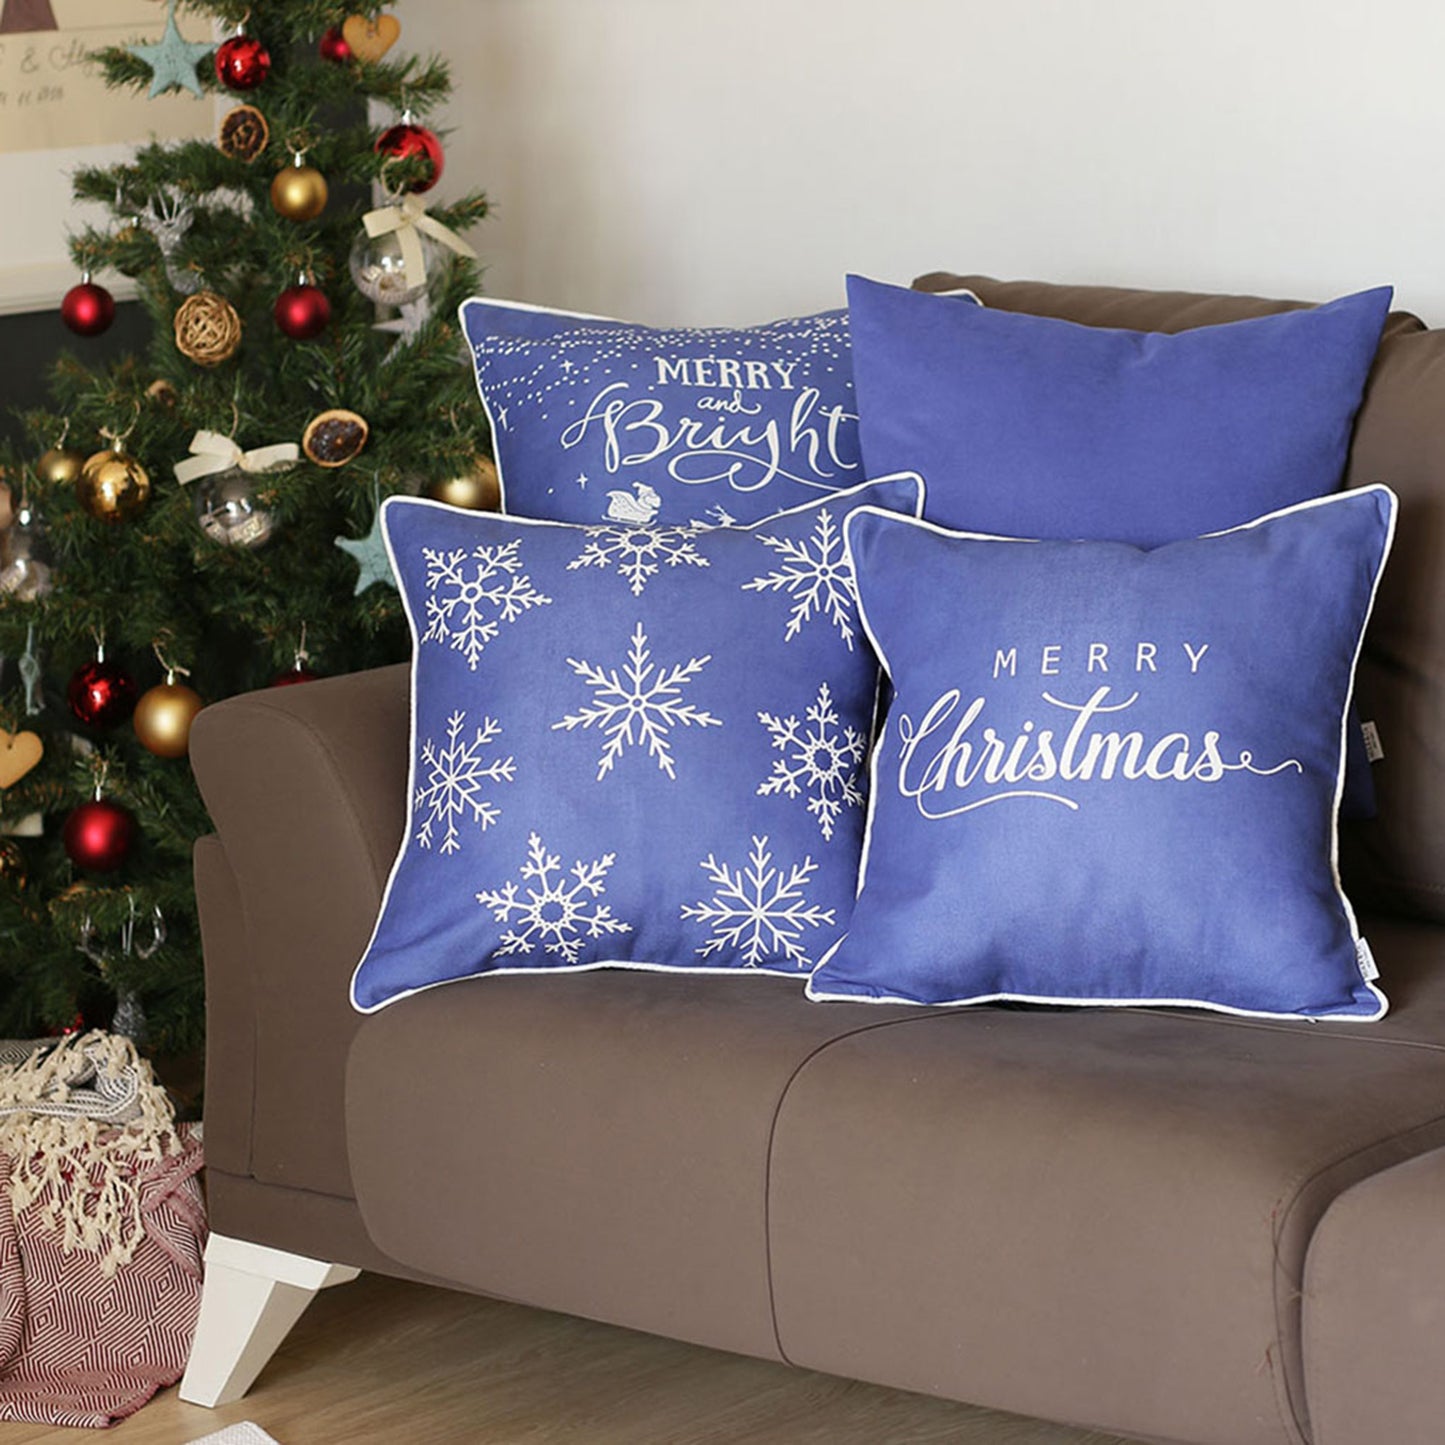 Mike&Co. New York Christmas Truck Decorative Throw Pillow Set of 4 - White - 18 x 18 in